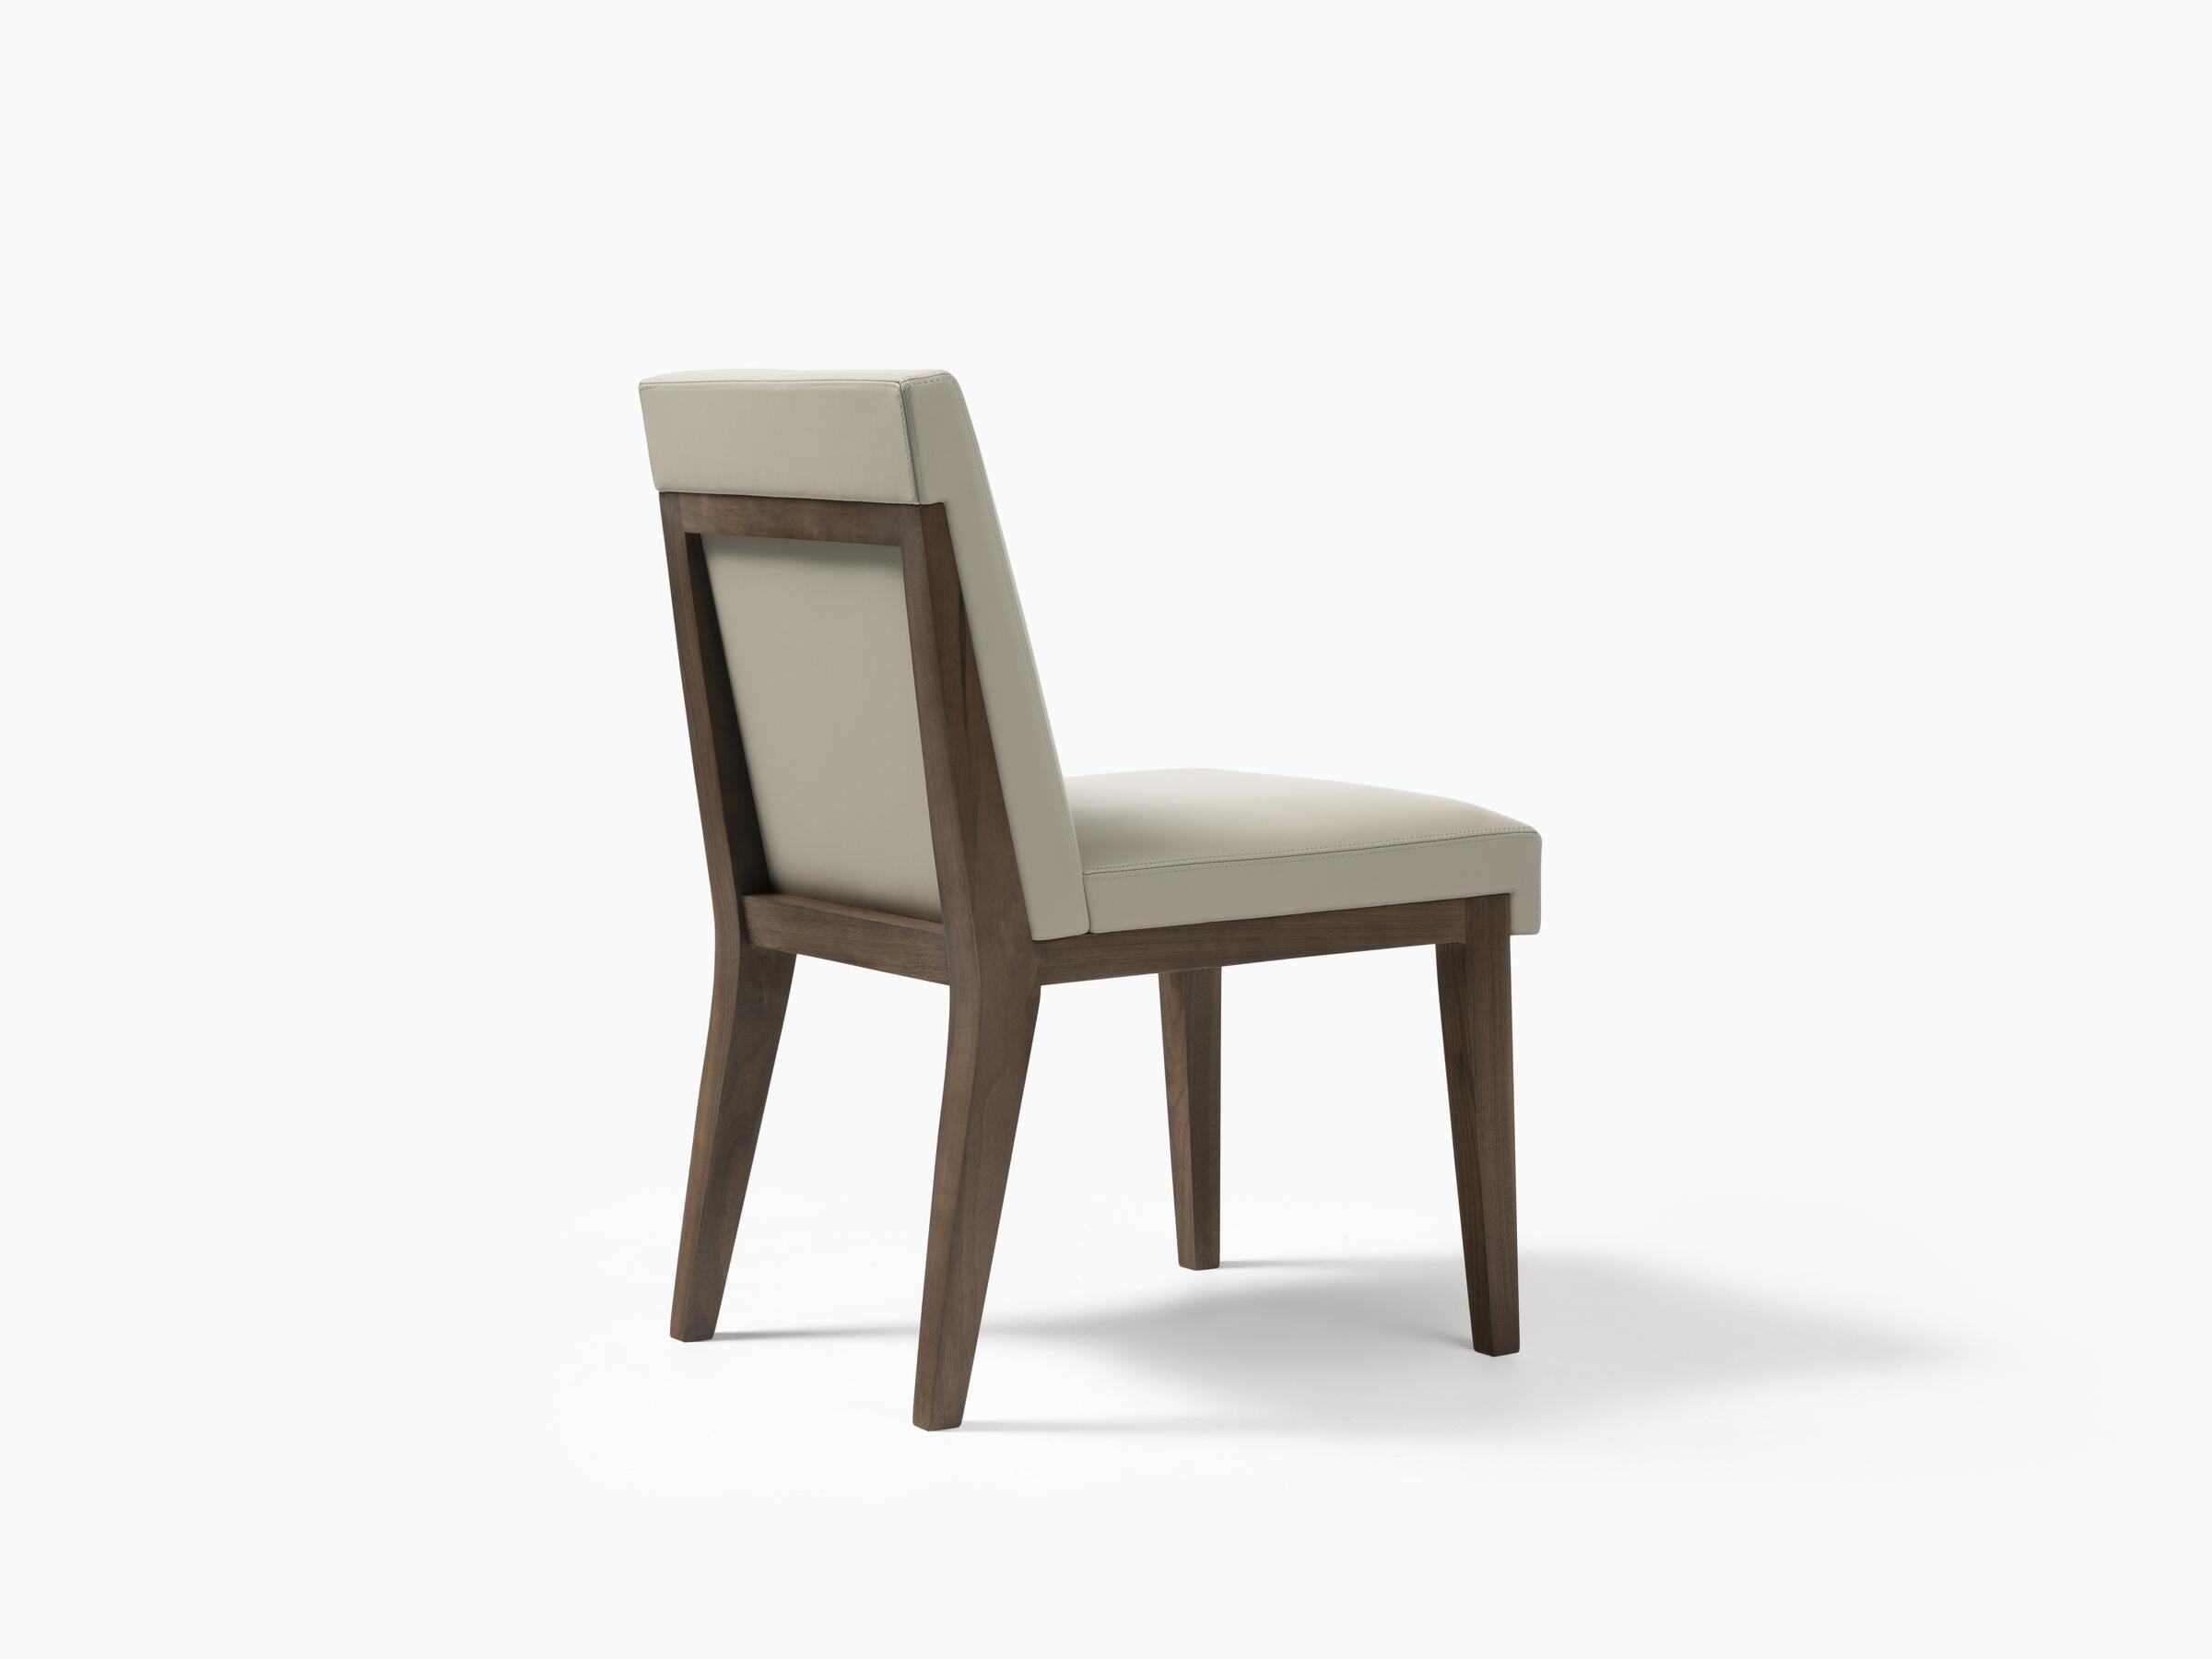 Finely crafted with exceptional attention to detail, the Hampton Dining Side Chair goes beyond the classic dining seat. The upholstery is stitched to interlock with the wood frame, creating a refined and perfectly trimmed look. Its tailored